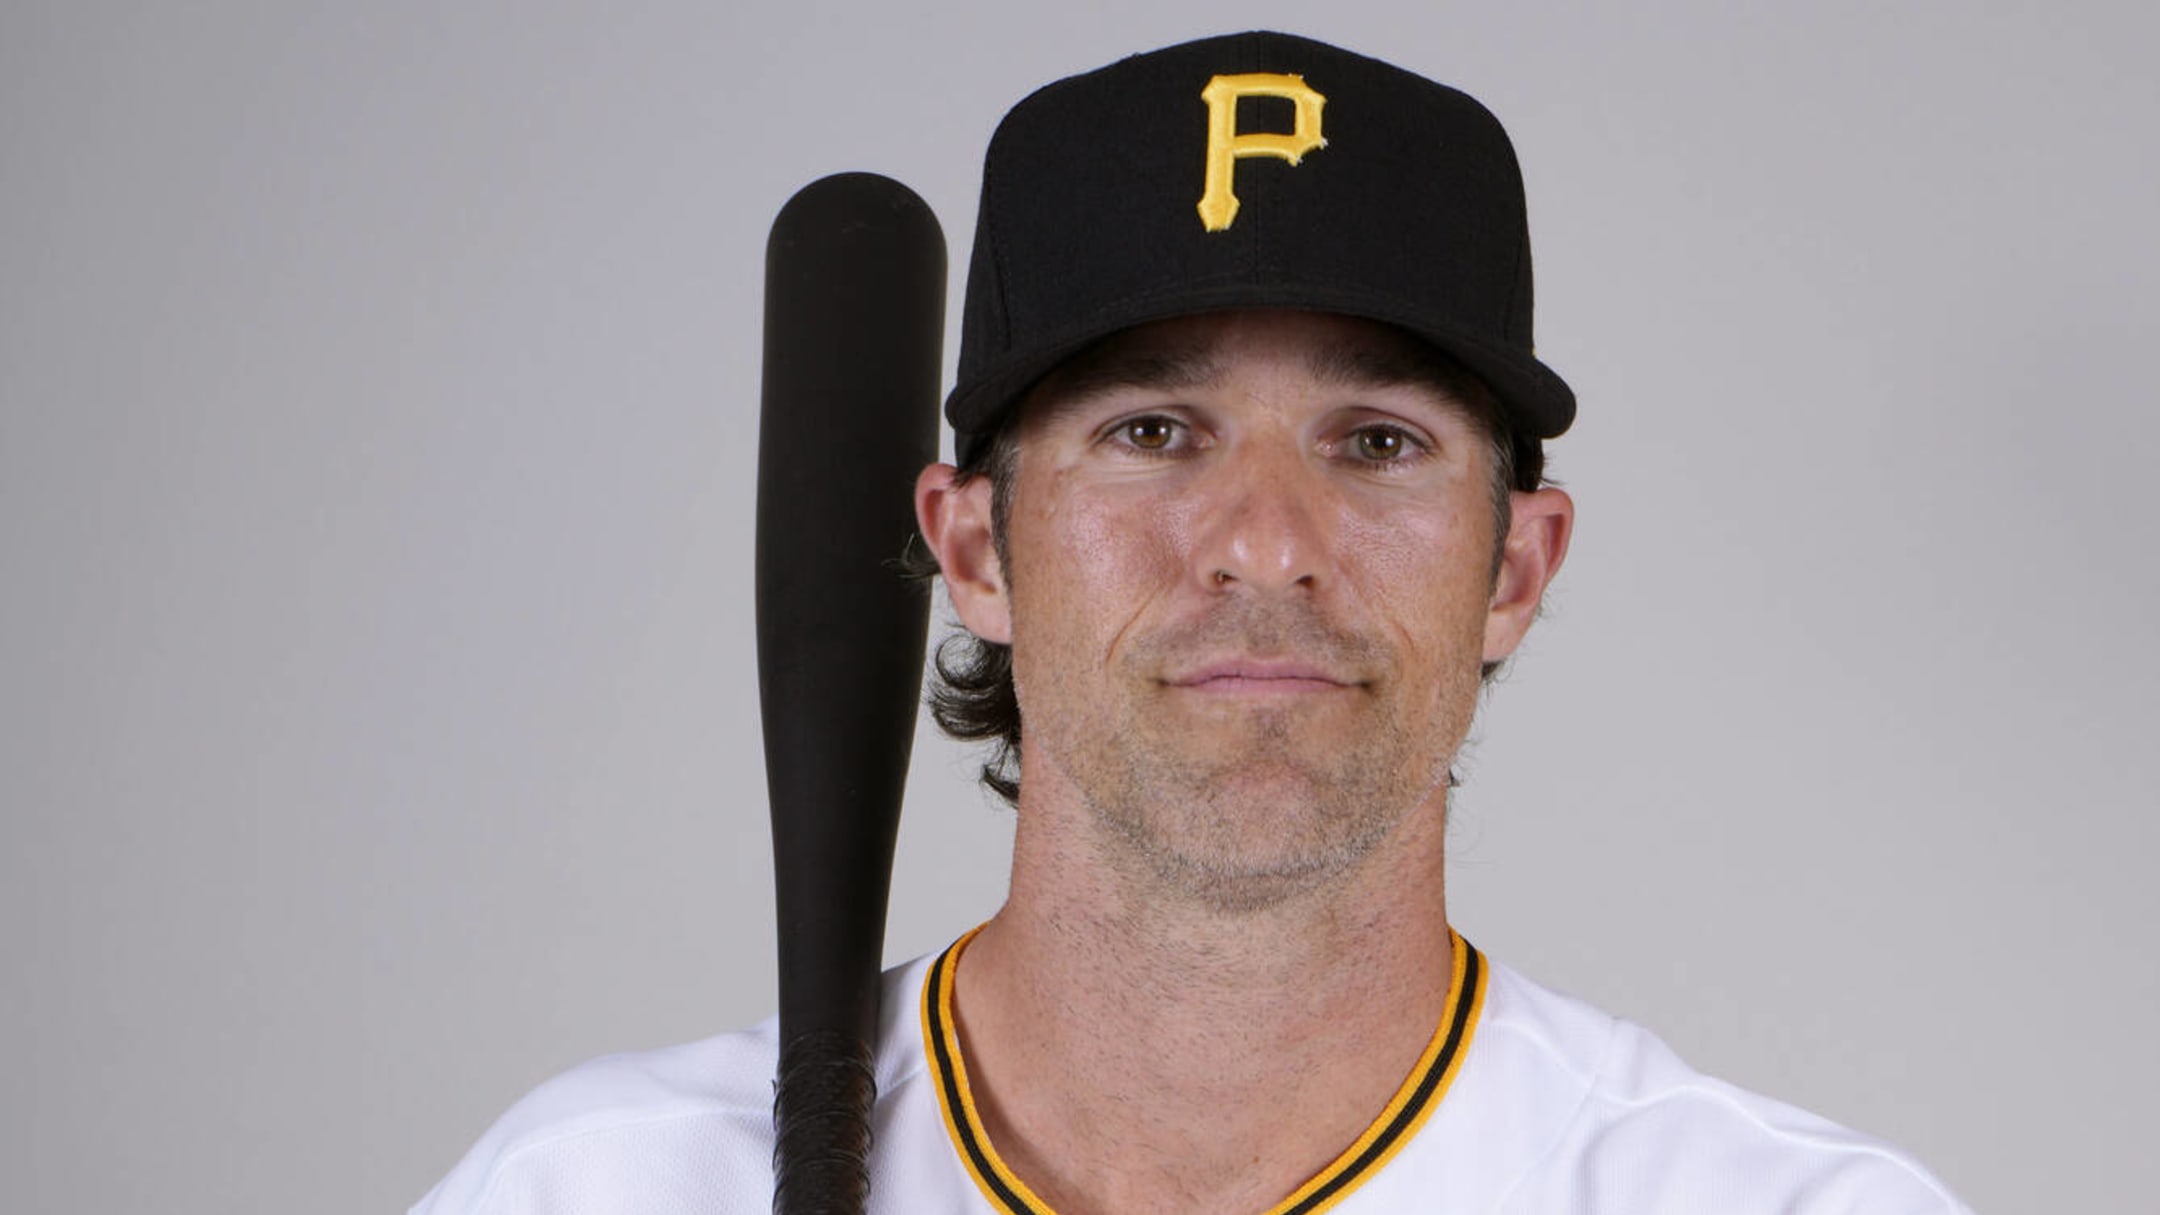 Drew Maggi, 33, gets MLB opportunity with Pirates after 13 minor-league  seasons